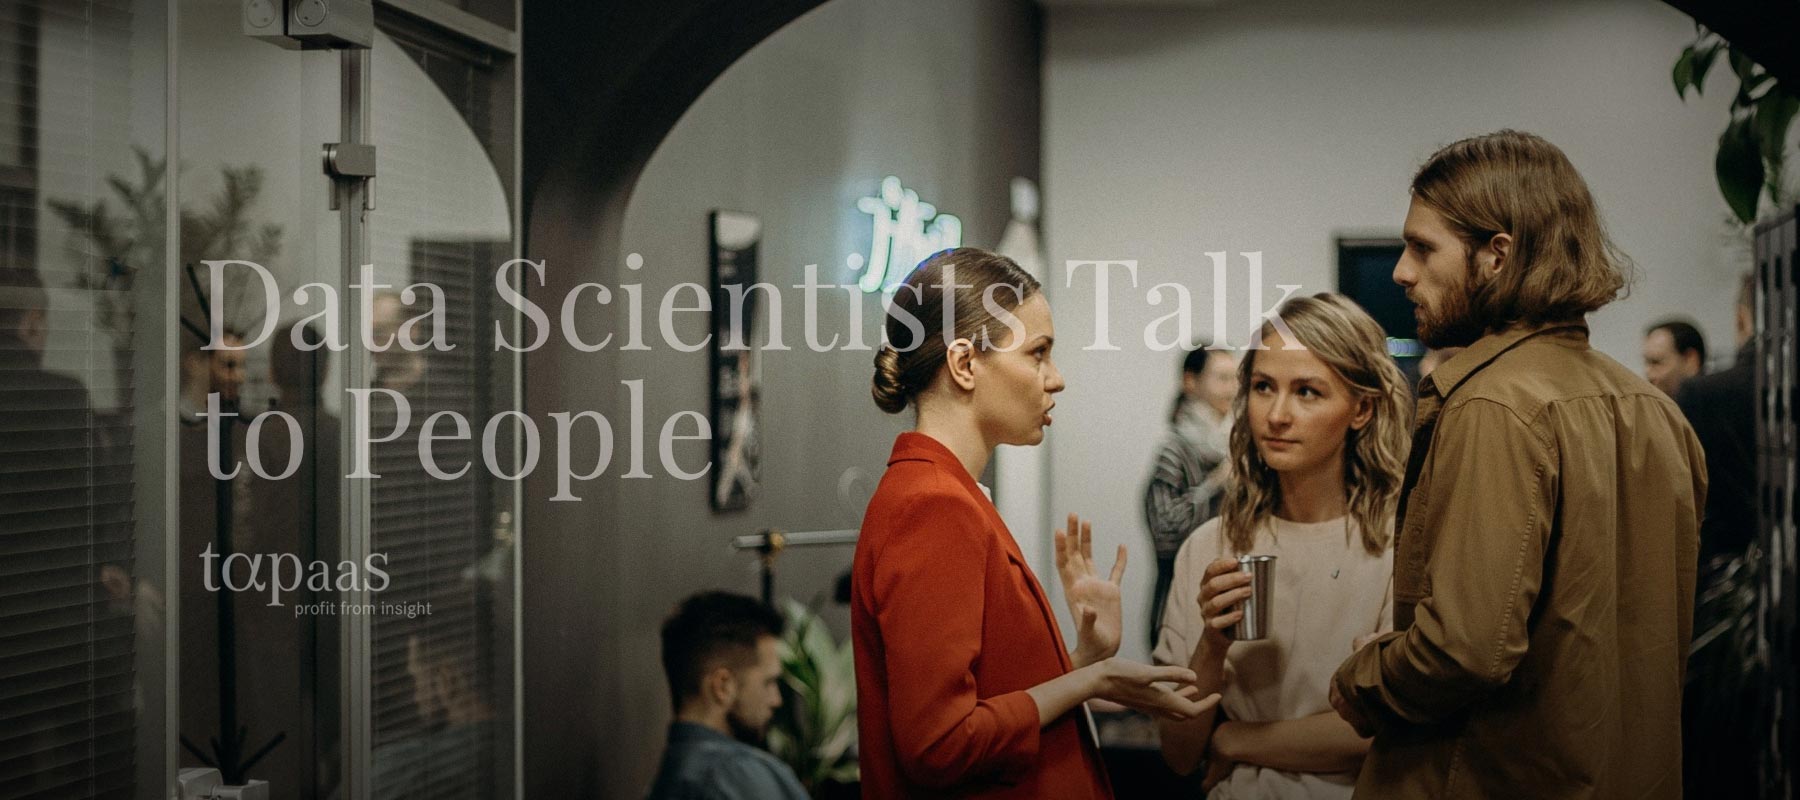 Data Scientists Talk To People - tapaas